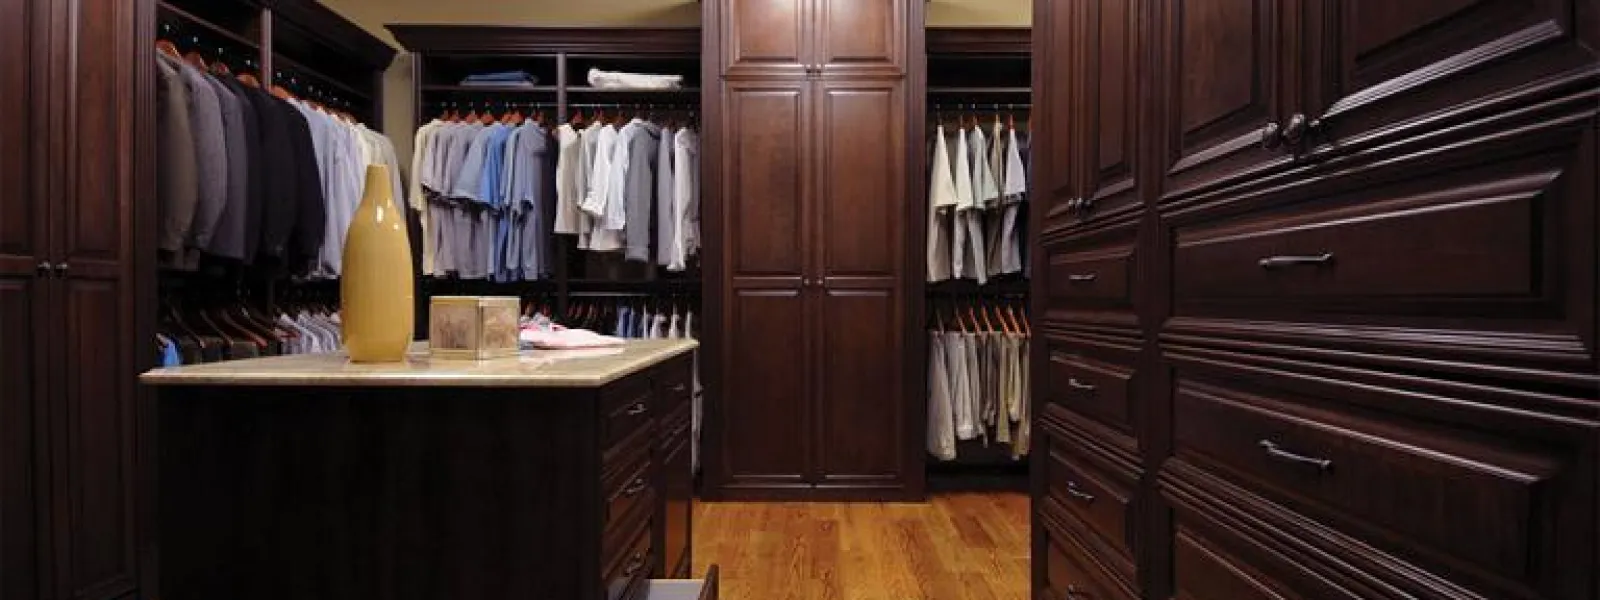 Savvy Shopping In Your Closet, For Your Closet